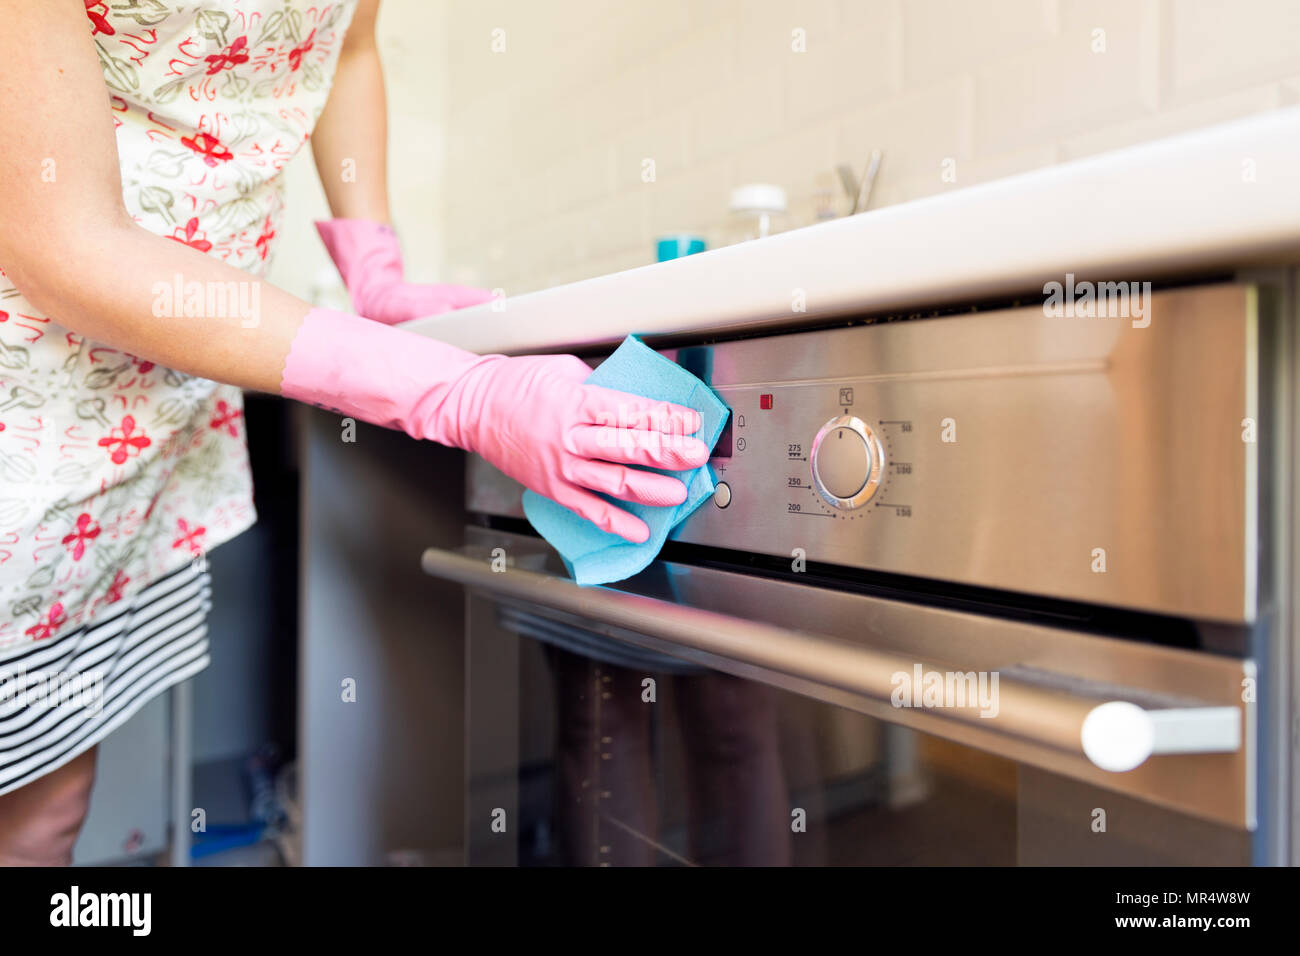 Woman's hand with pink protective gloves cleaning oven door. People, housework, cleaning concept Stock Photo